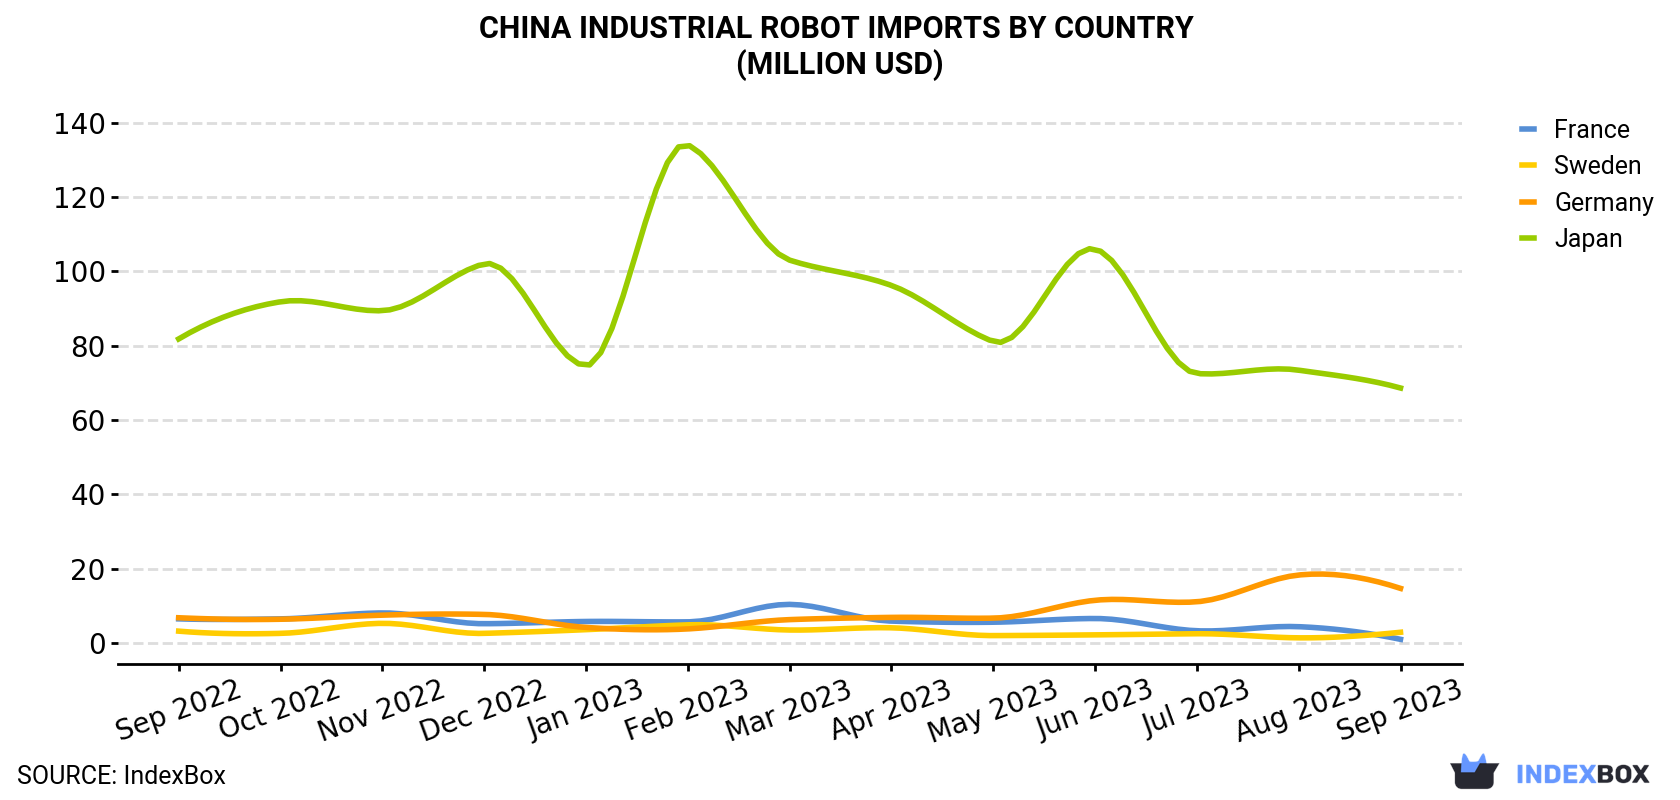 China Industrial Robot Imports By Country (Million USD)